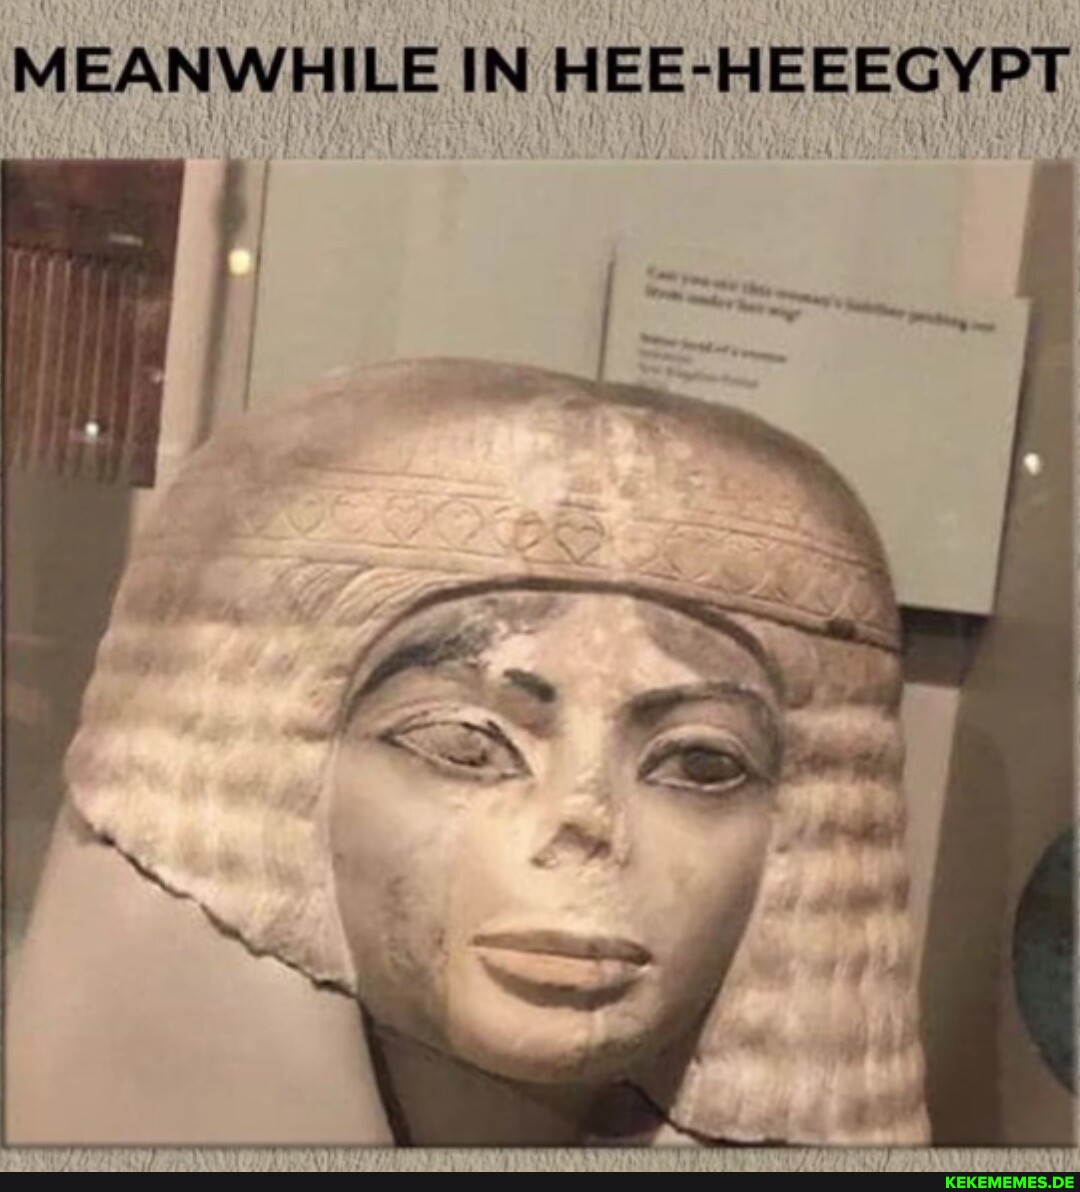 MEANWHILE IN HEE-HEEEGYPT